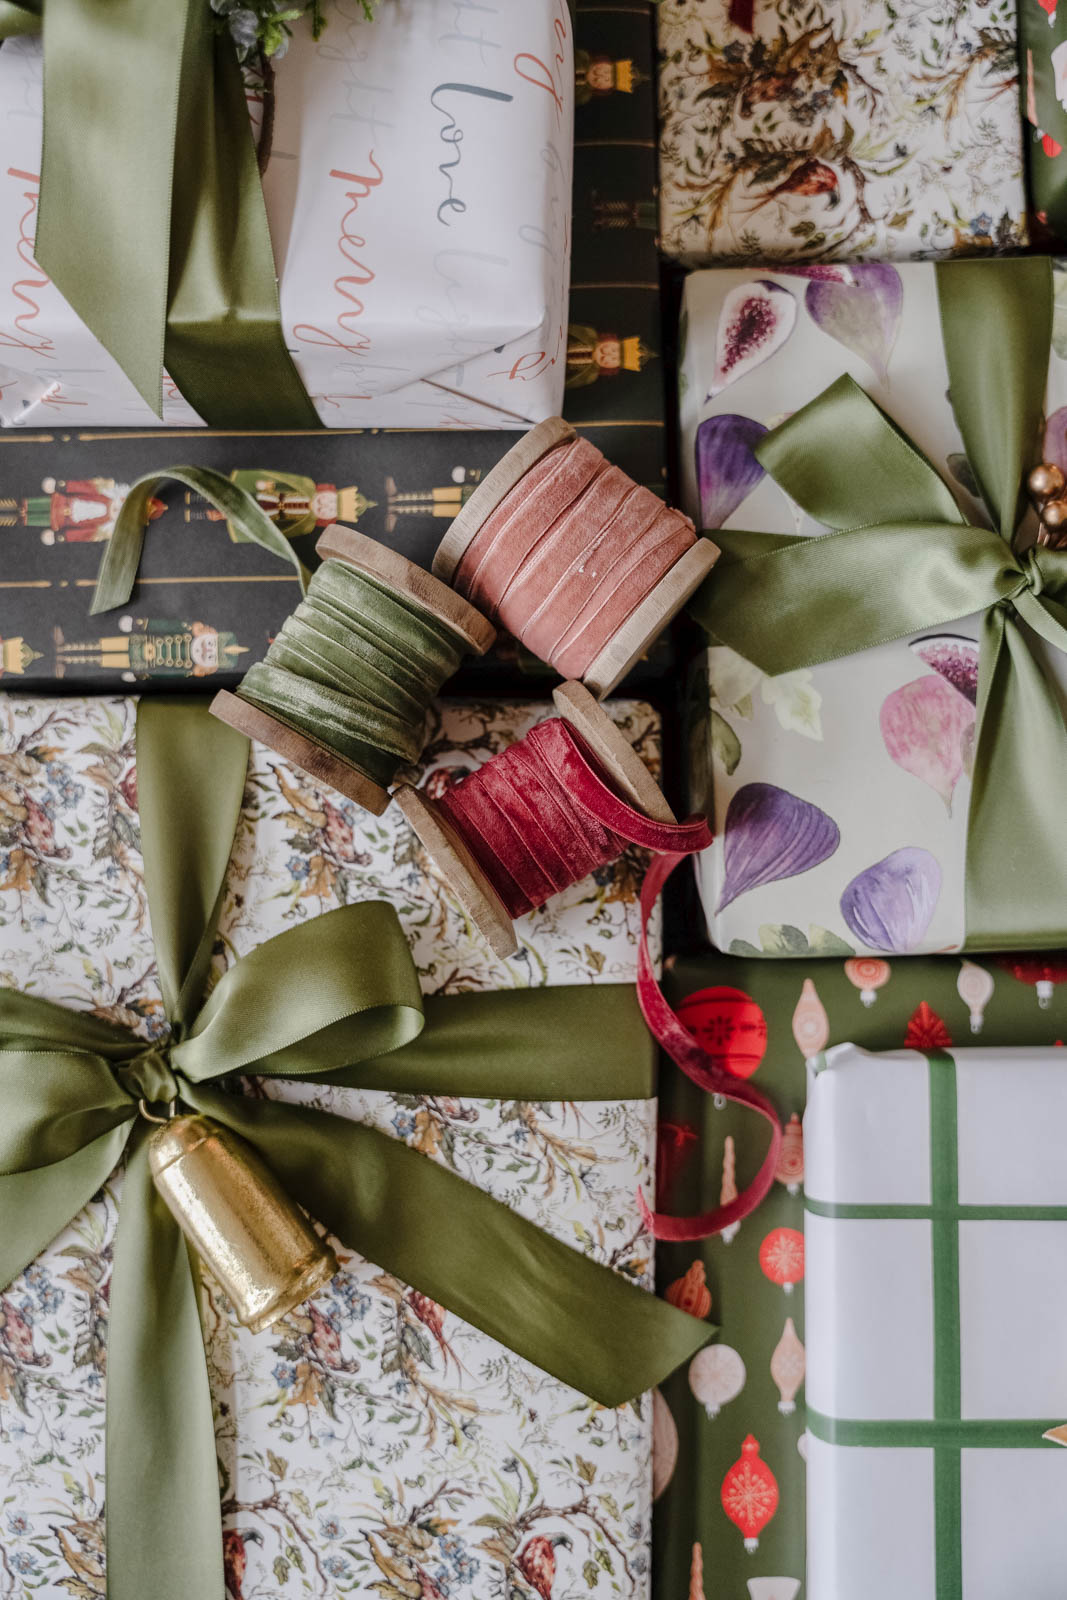 Unwrapping The Best: Putting Gift Wrap Cutters to The Test - Chris